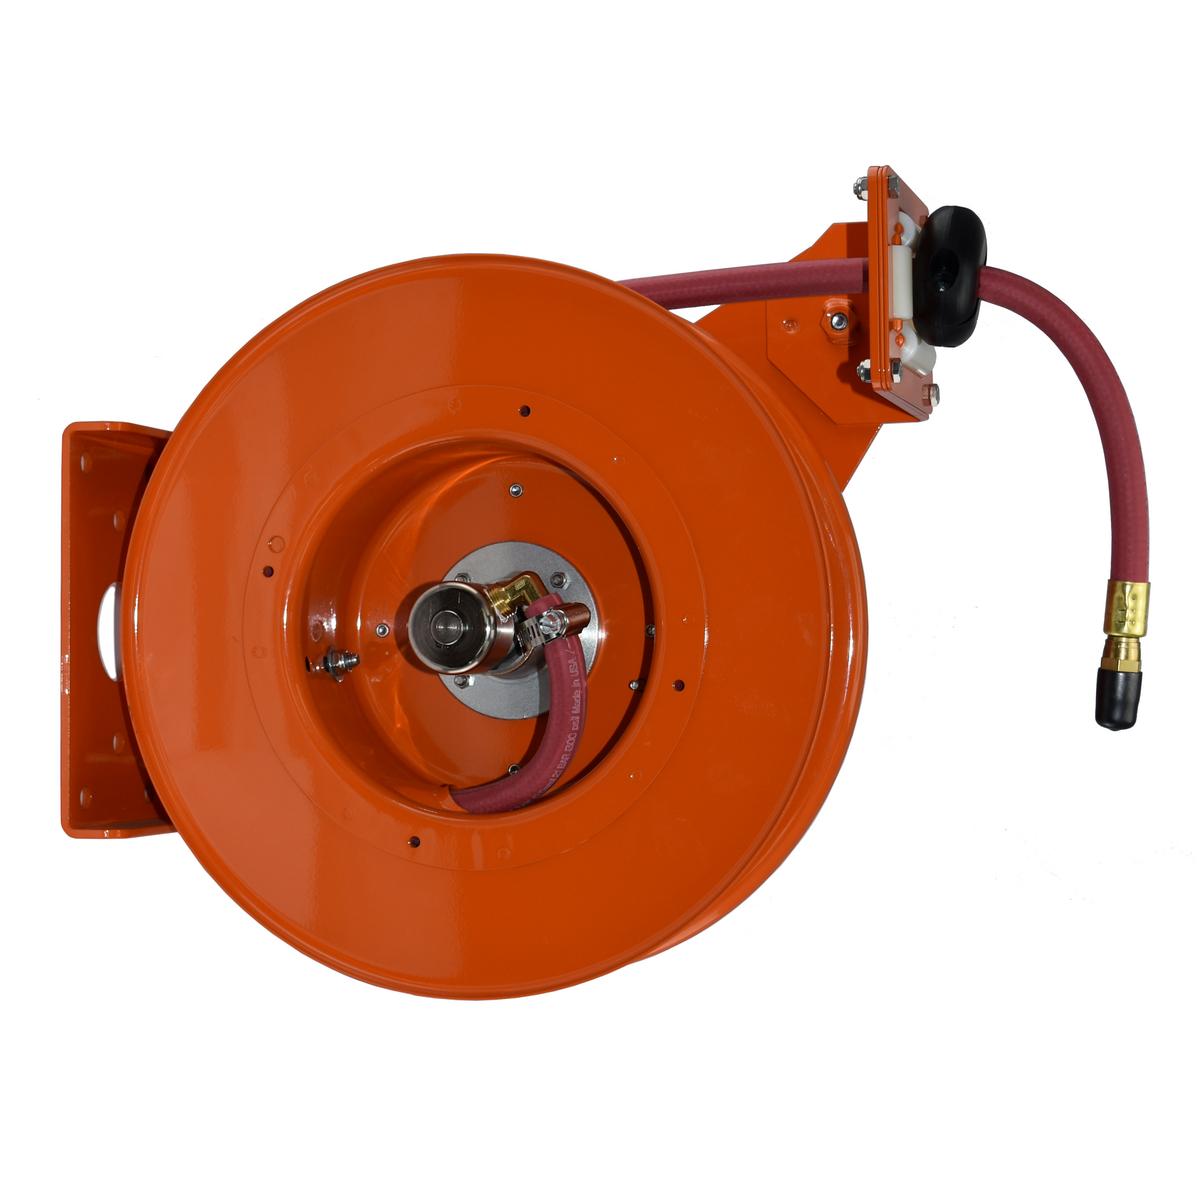 Hubbell HM141-4-P4 The Gleason Hose-Master hose reel is the most rugged single hose, general purpose hose reel of its size in the industry. We created it with the most demanding hose reeling applications in mind, hand pull or machine mounted. Oversized bearings and a heavy 